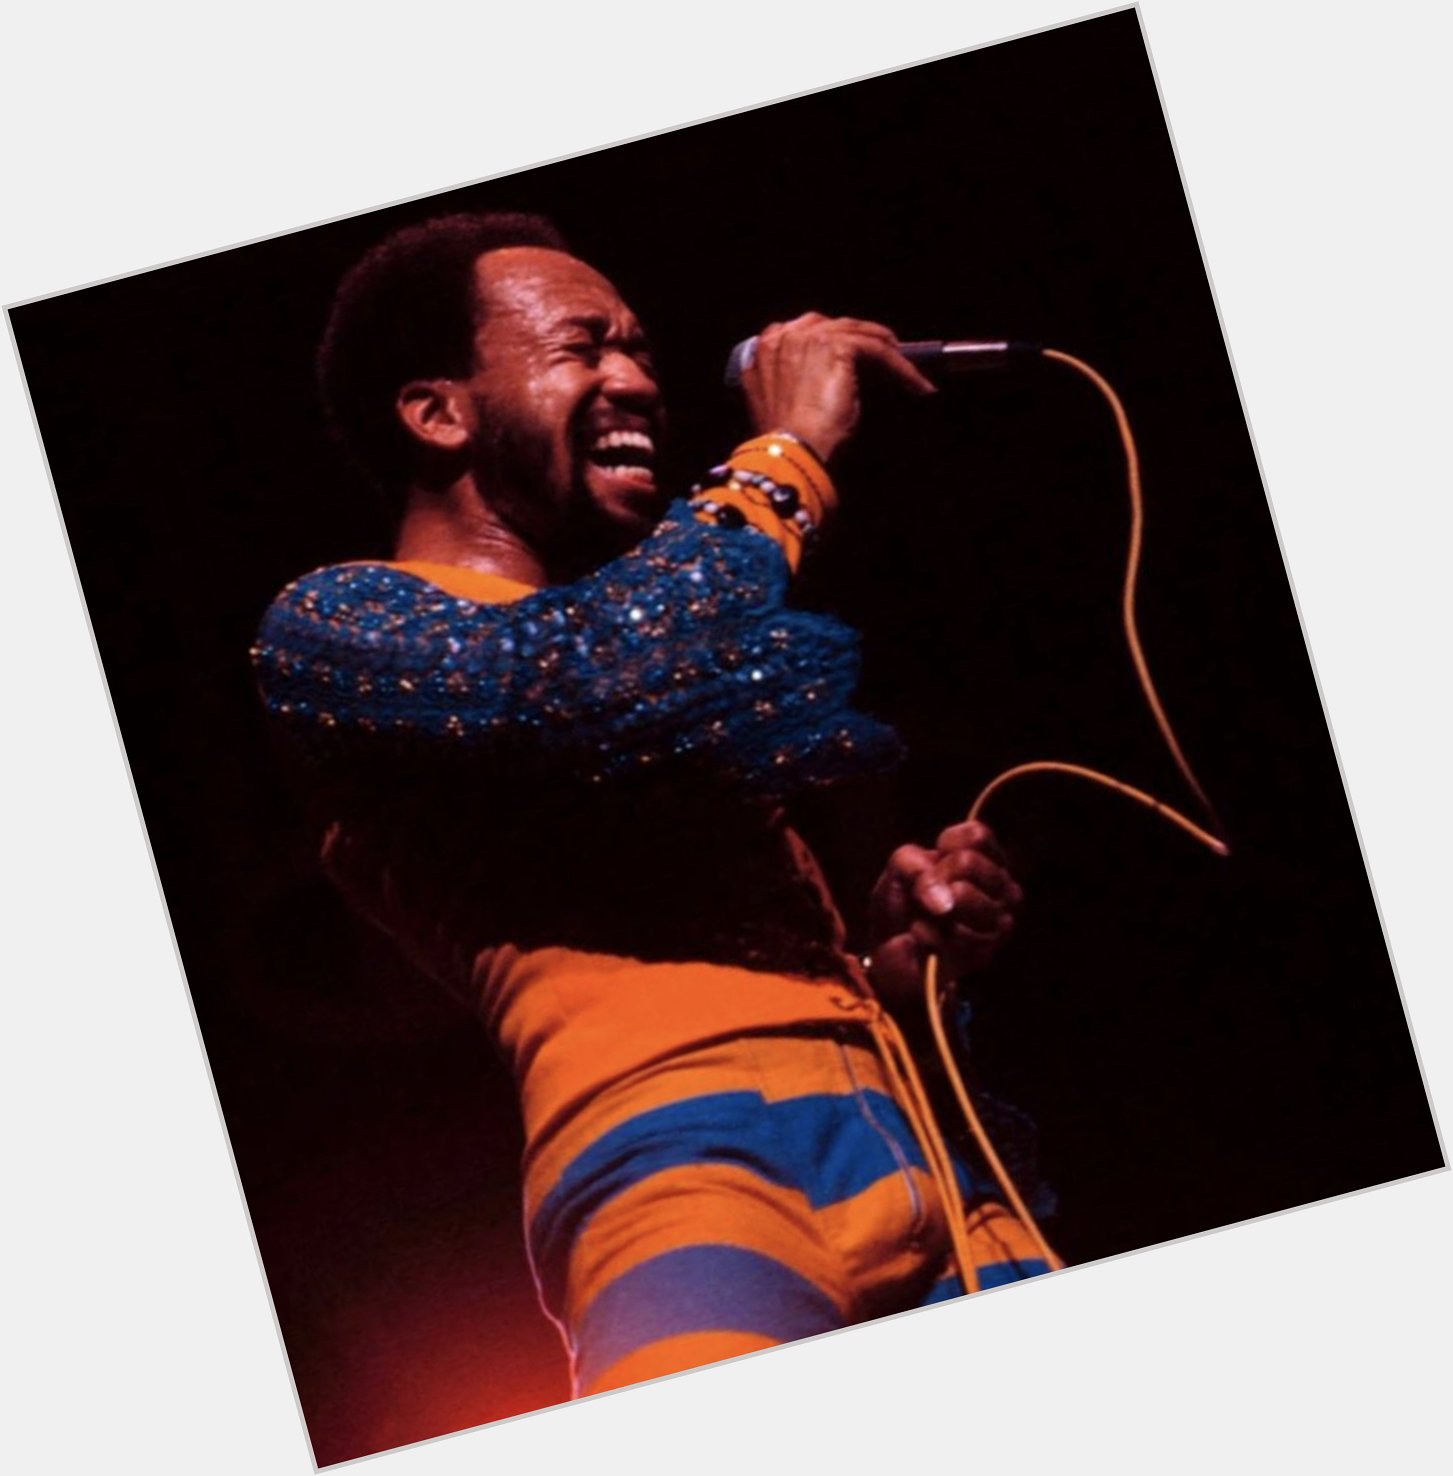 Happy 76th Birthday to our guiding light, Maurice White.

Rest in Love. 